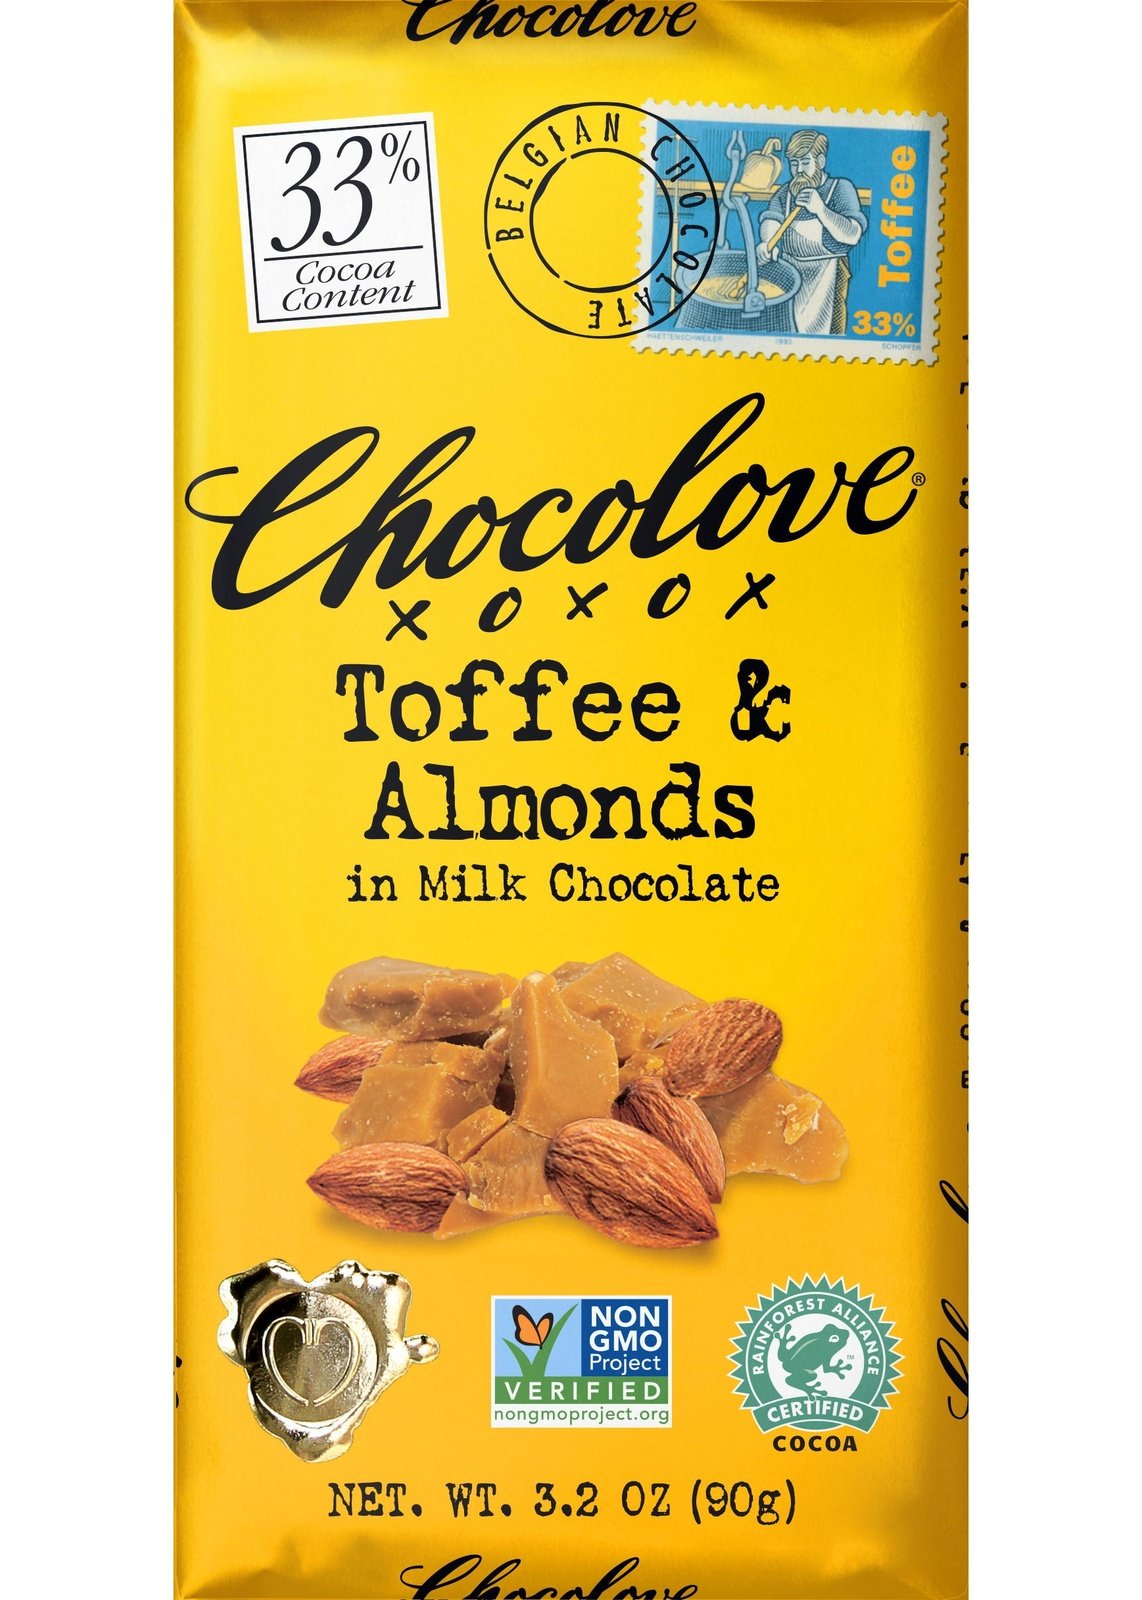 CHOCOLOVE Toffee & Almonds In Milk Chocolate